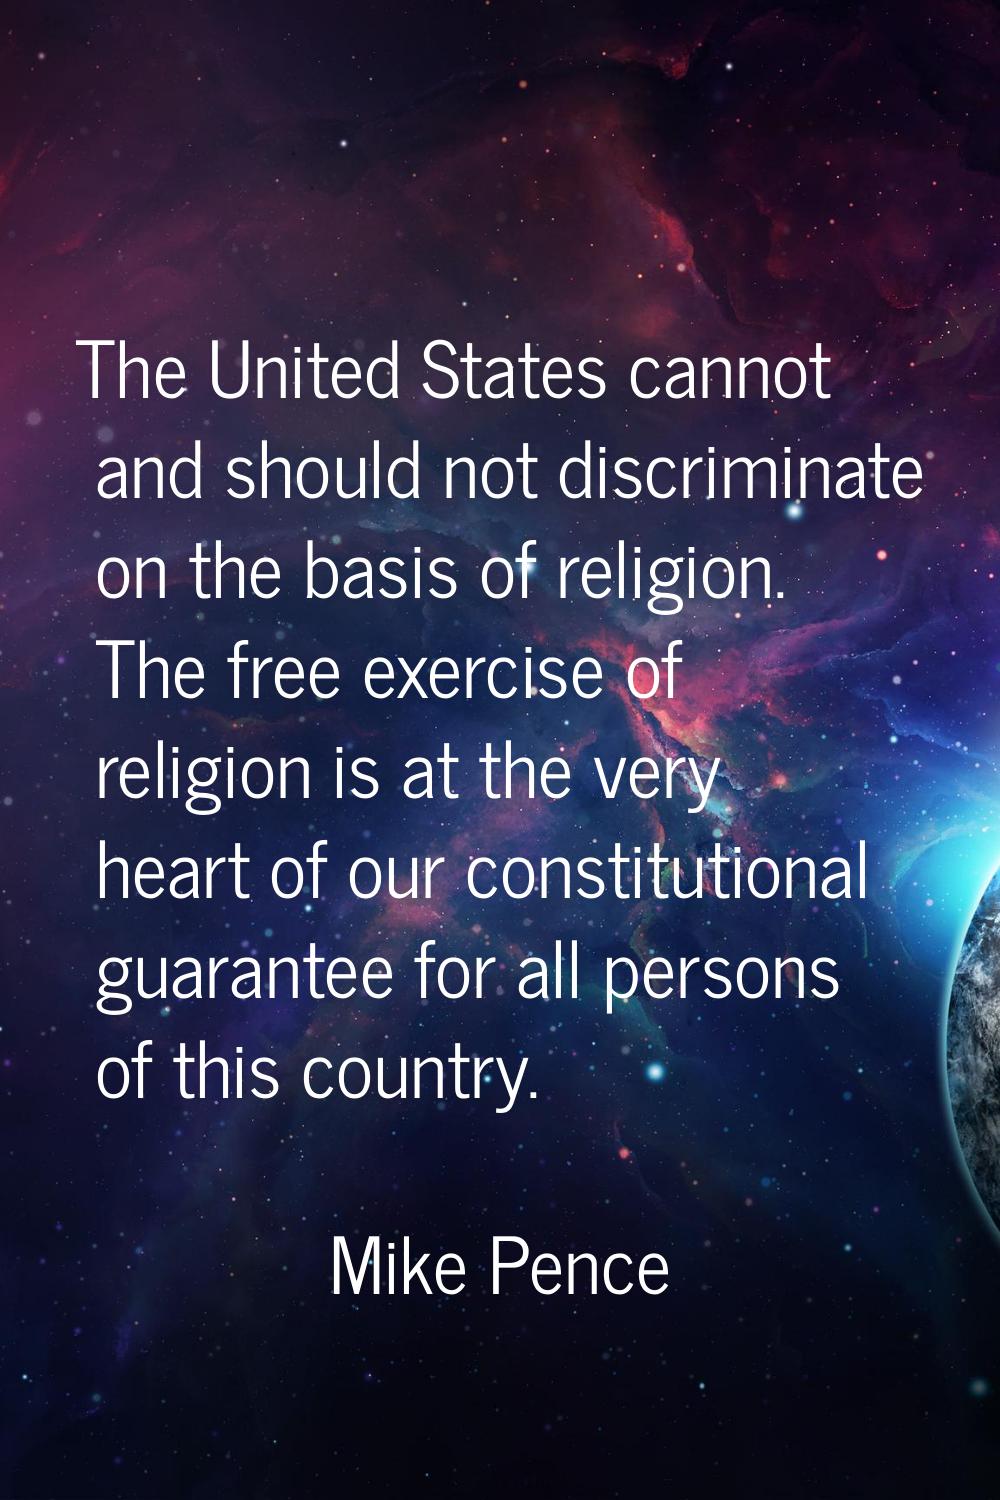 The United States cannot and should not discriminate on the basis of religion. The free exercise of